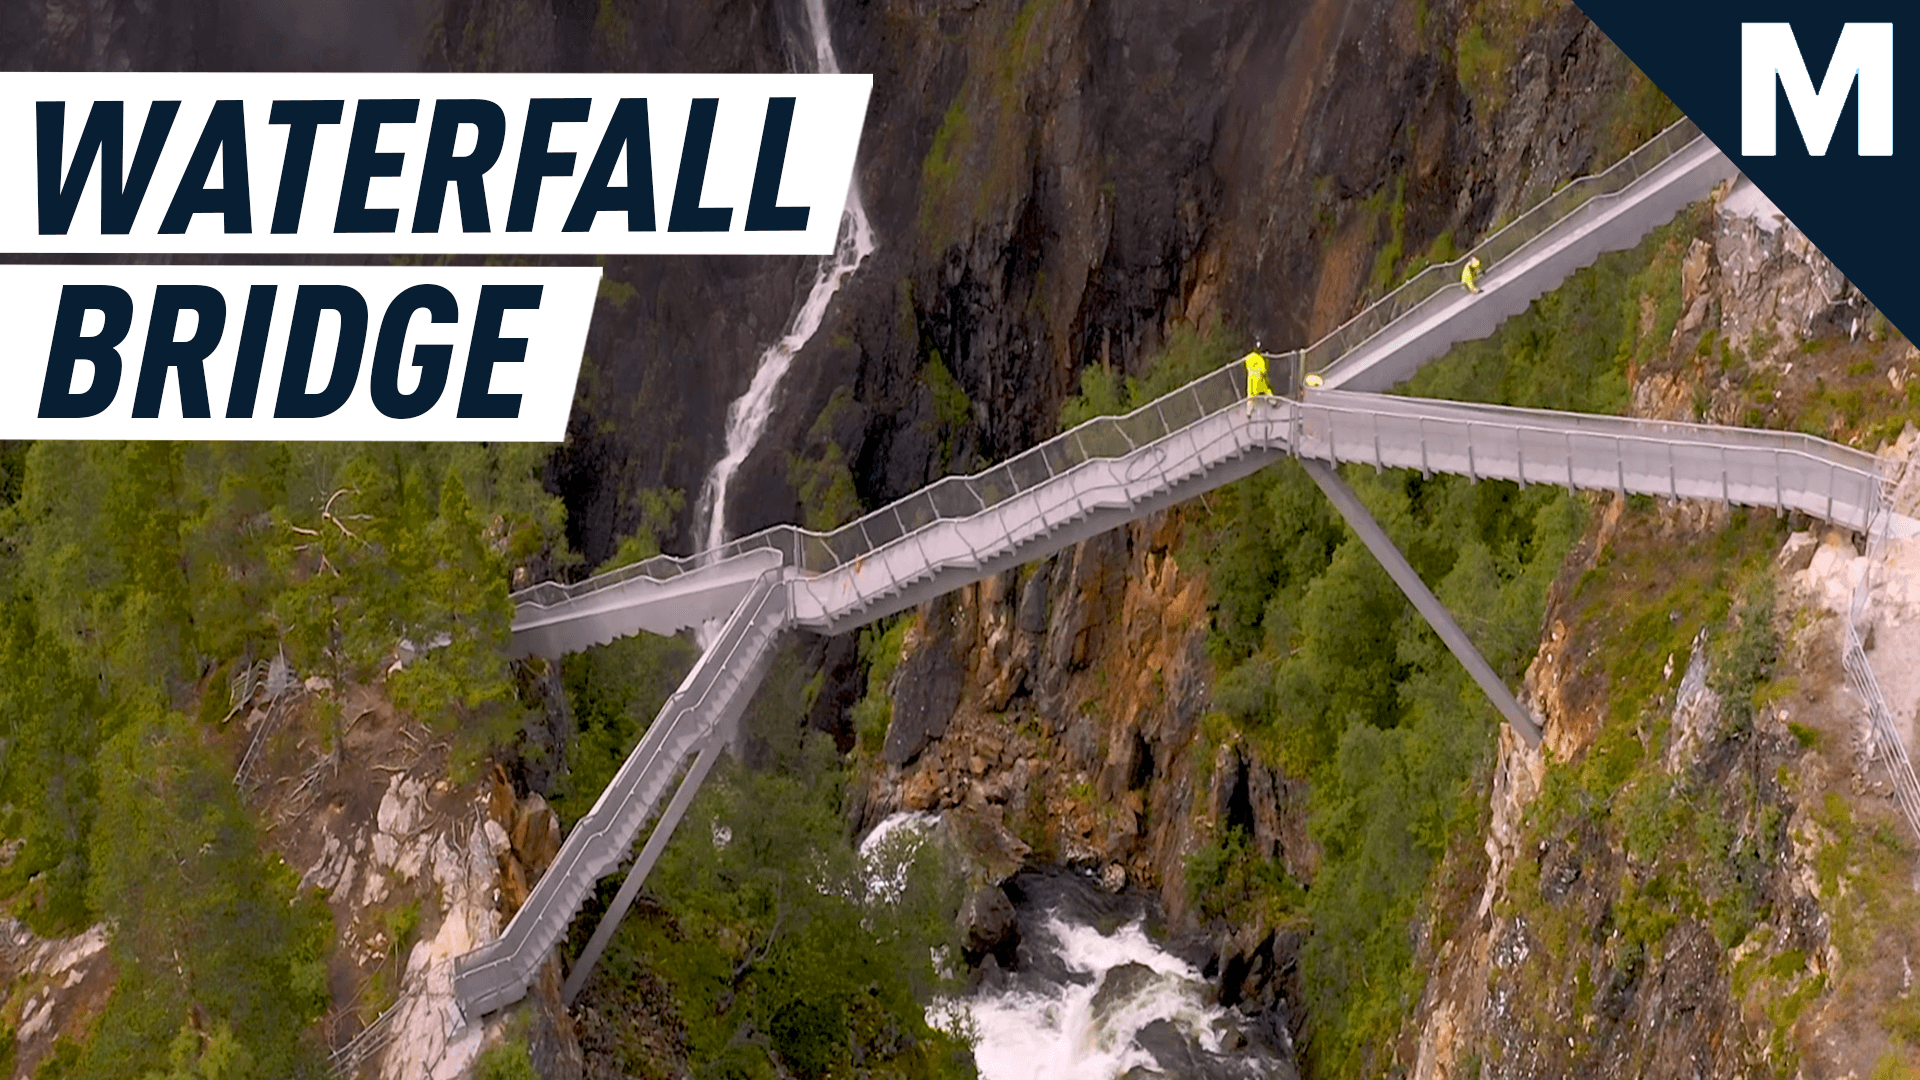 Walk over a waterfall on this breathtaking bridge in Norway